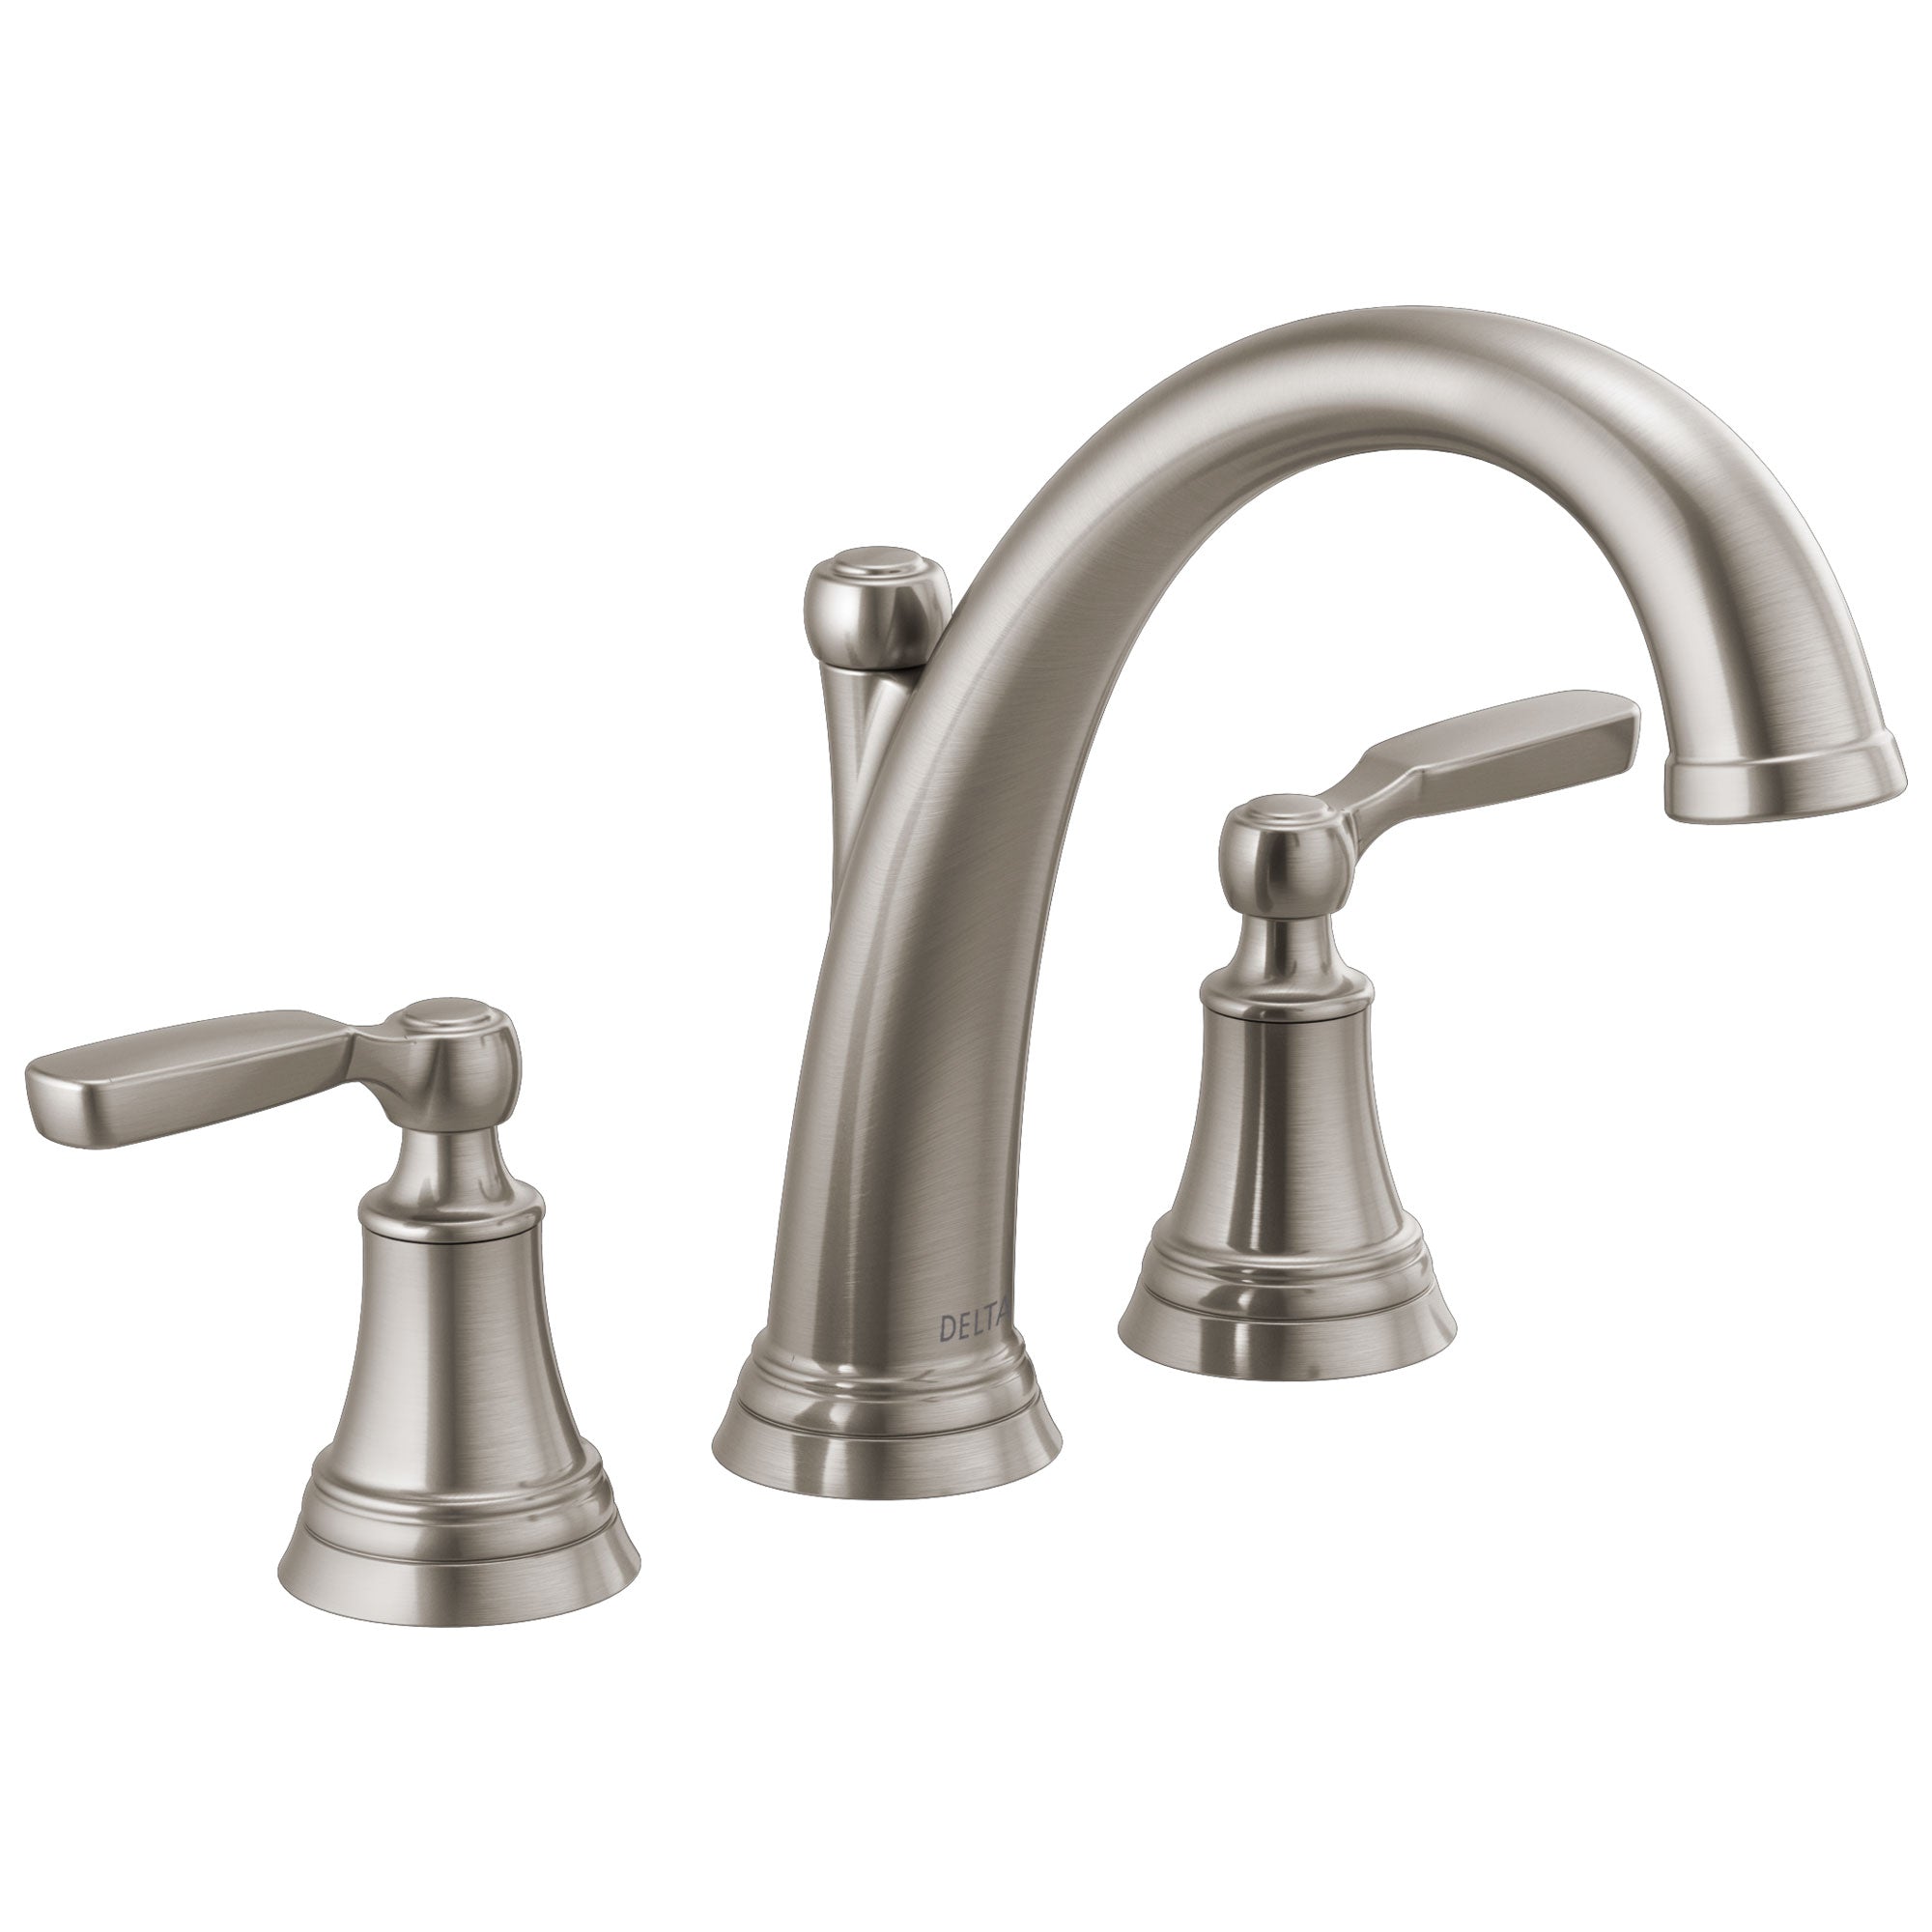 Delta Woodhurst Stainless Steel Finish Deck Mount Roman Tub Filler Faucet Includes Rough-in Valve and Lever Handles D3164V